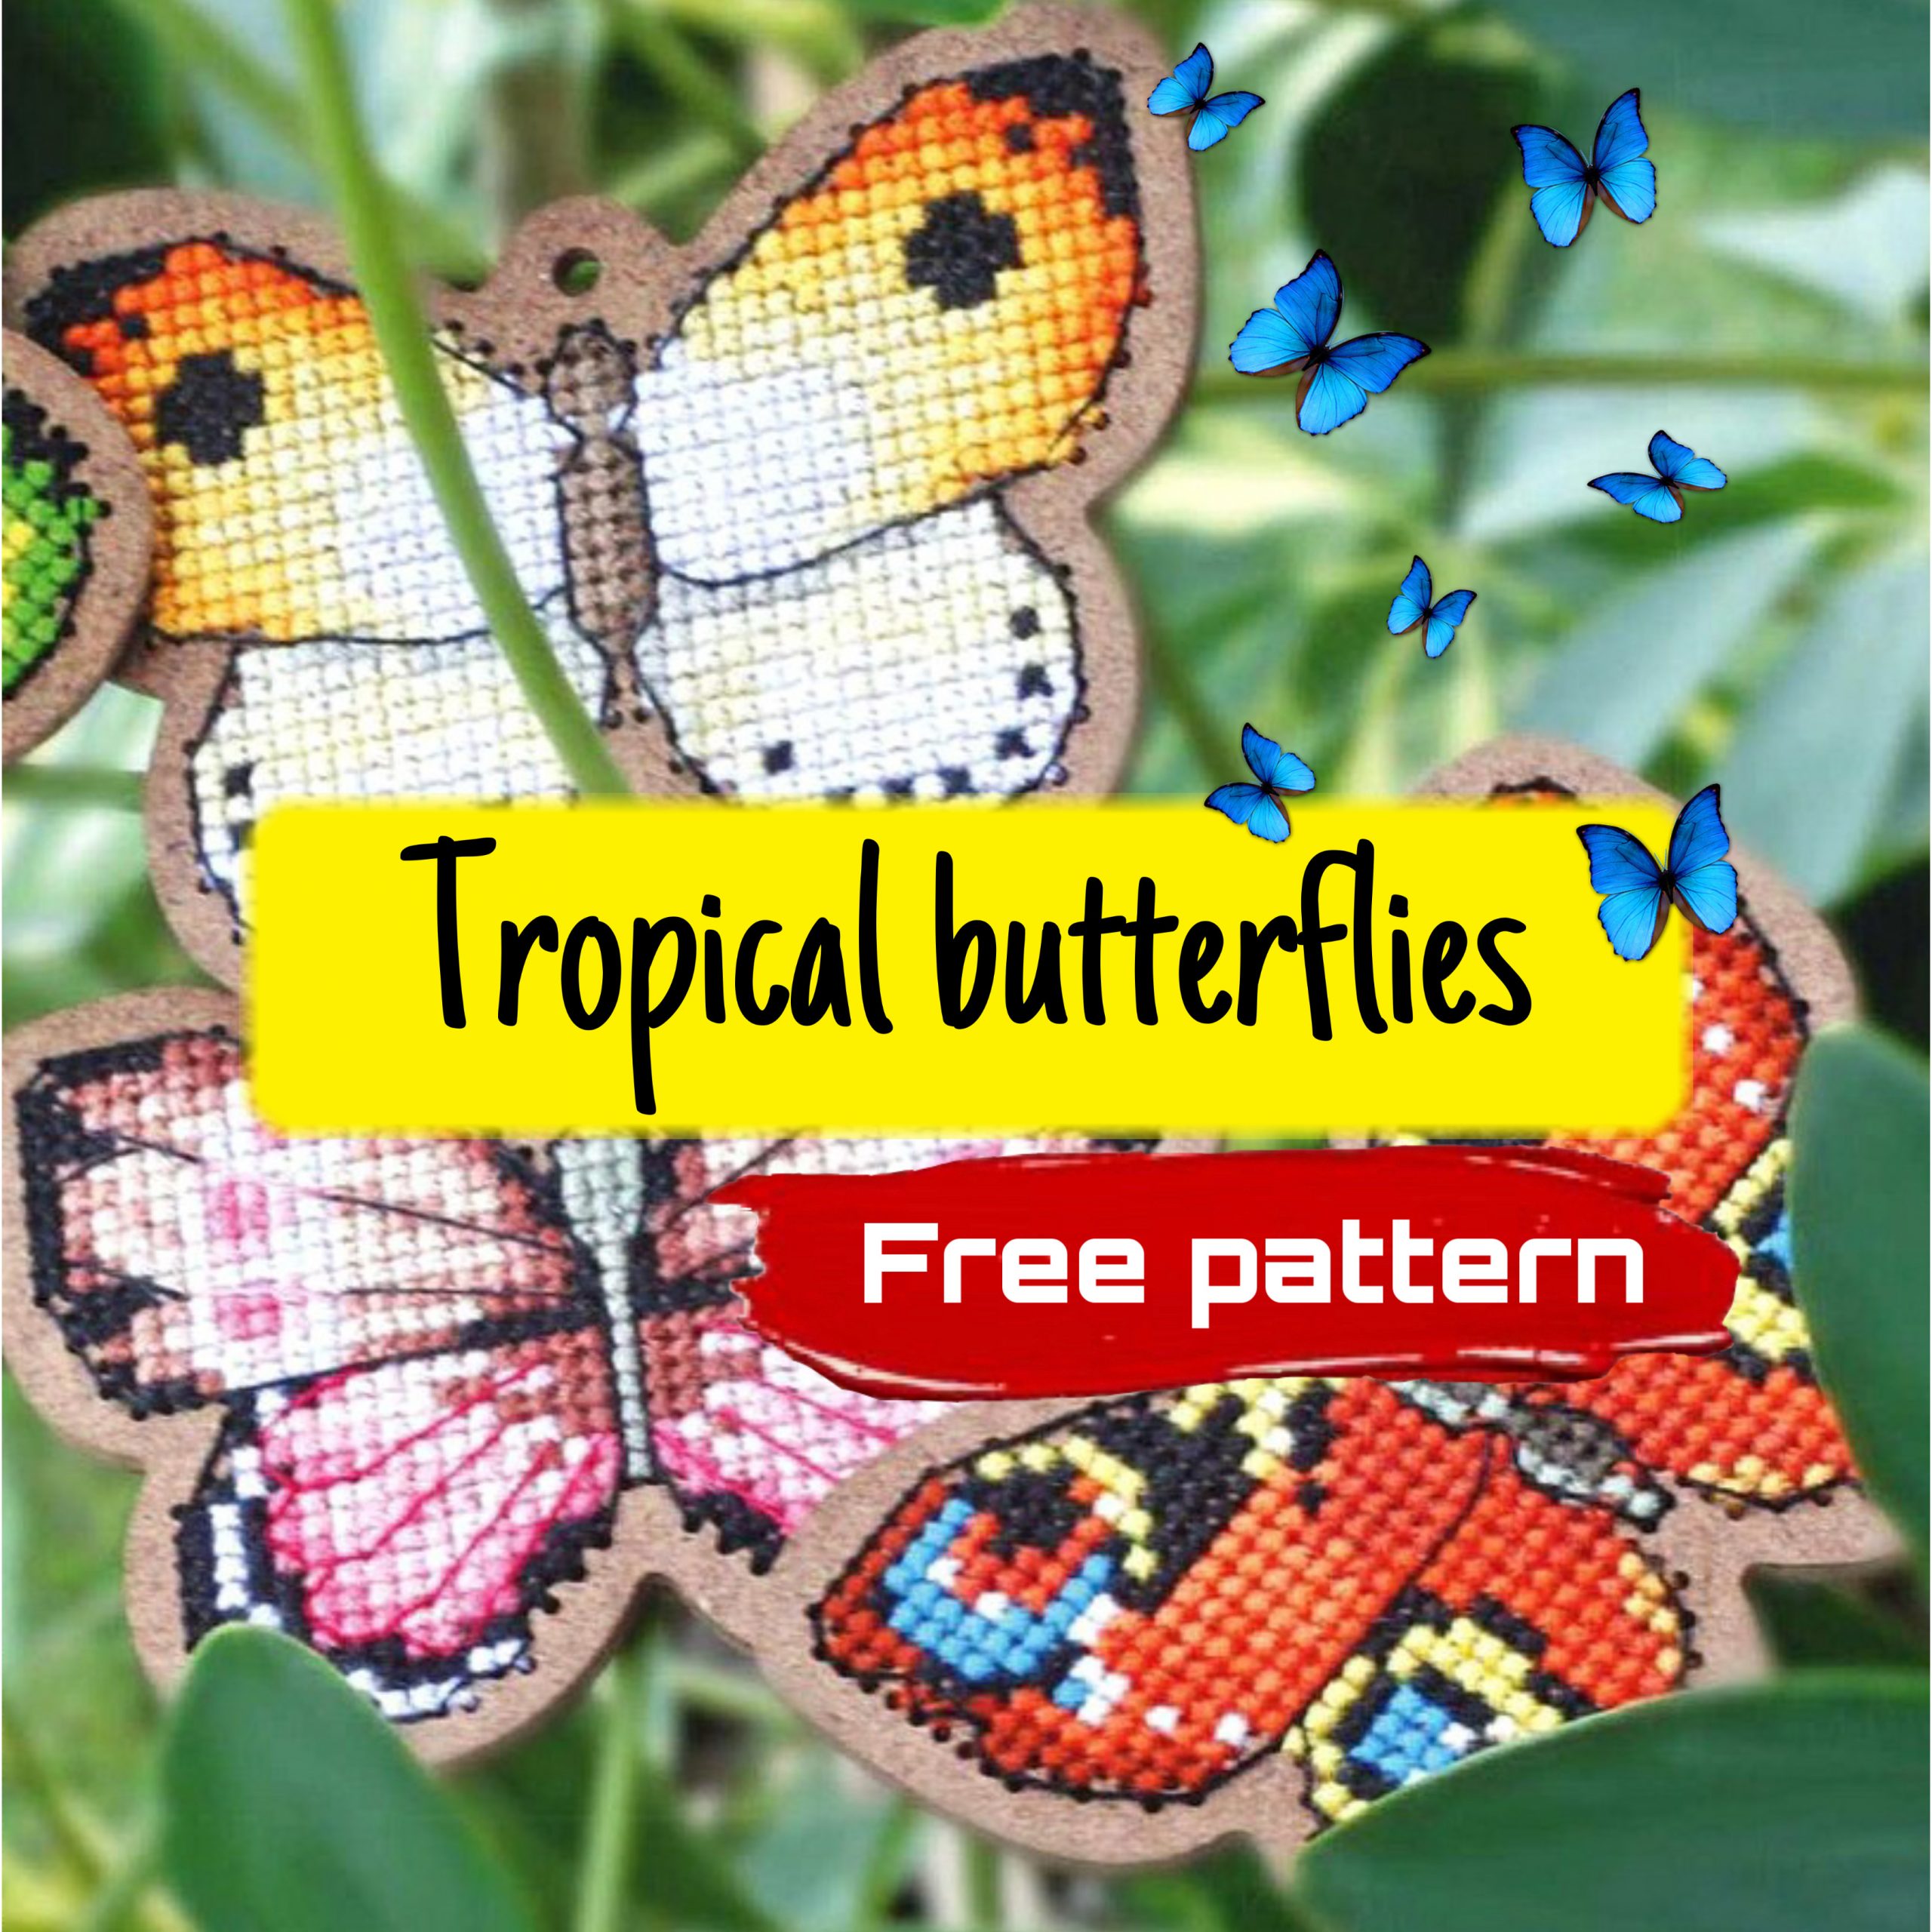 Free cross stitch patterns with 5 tropical butterflies